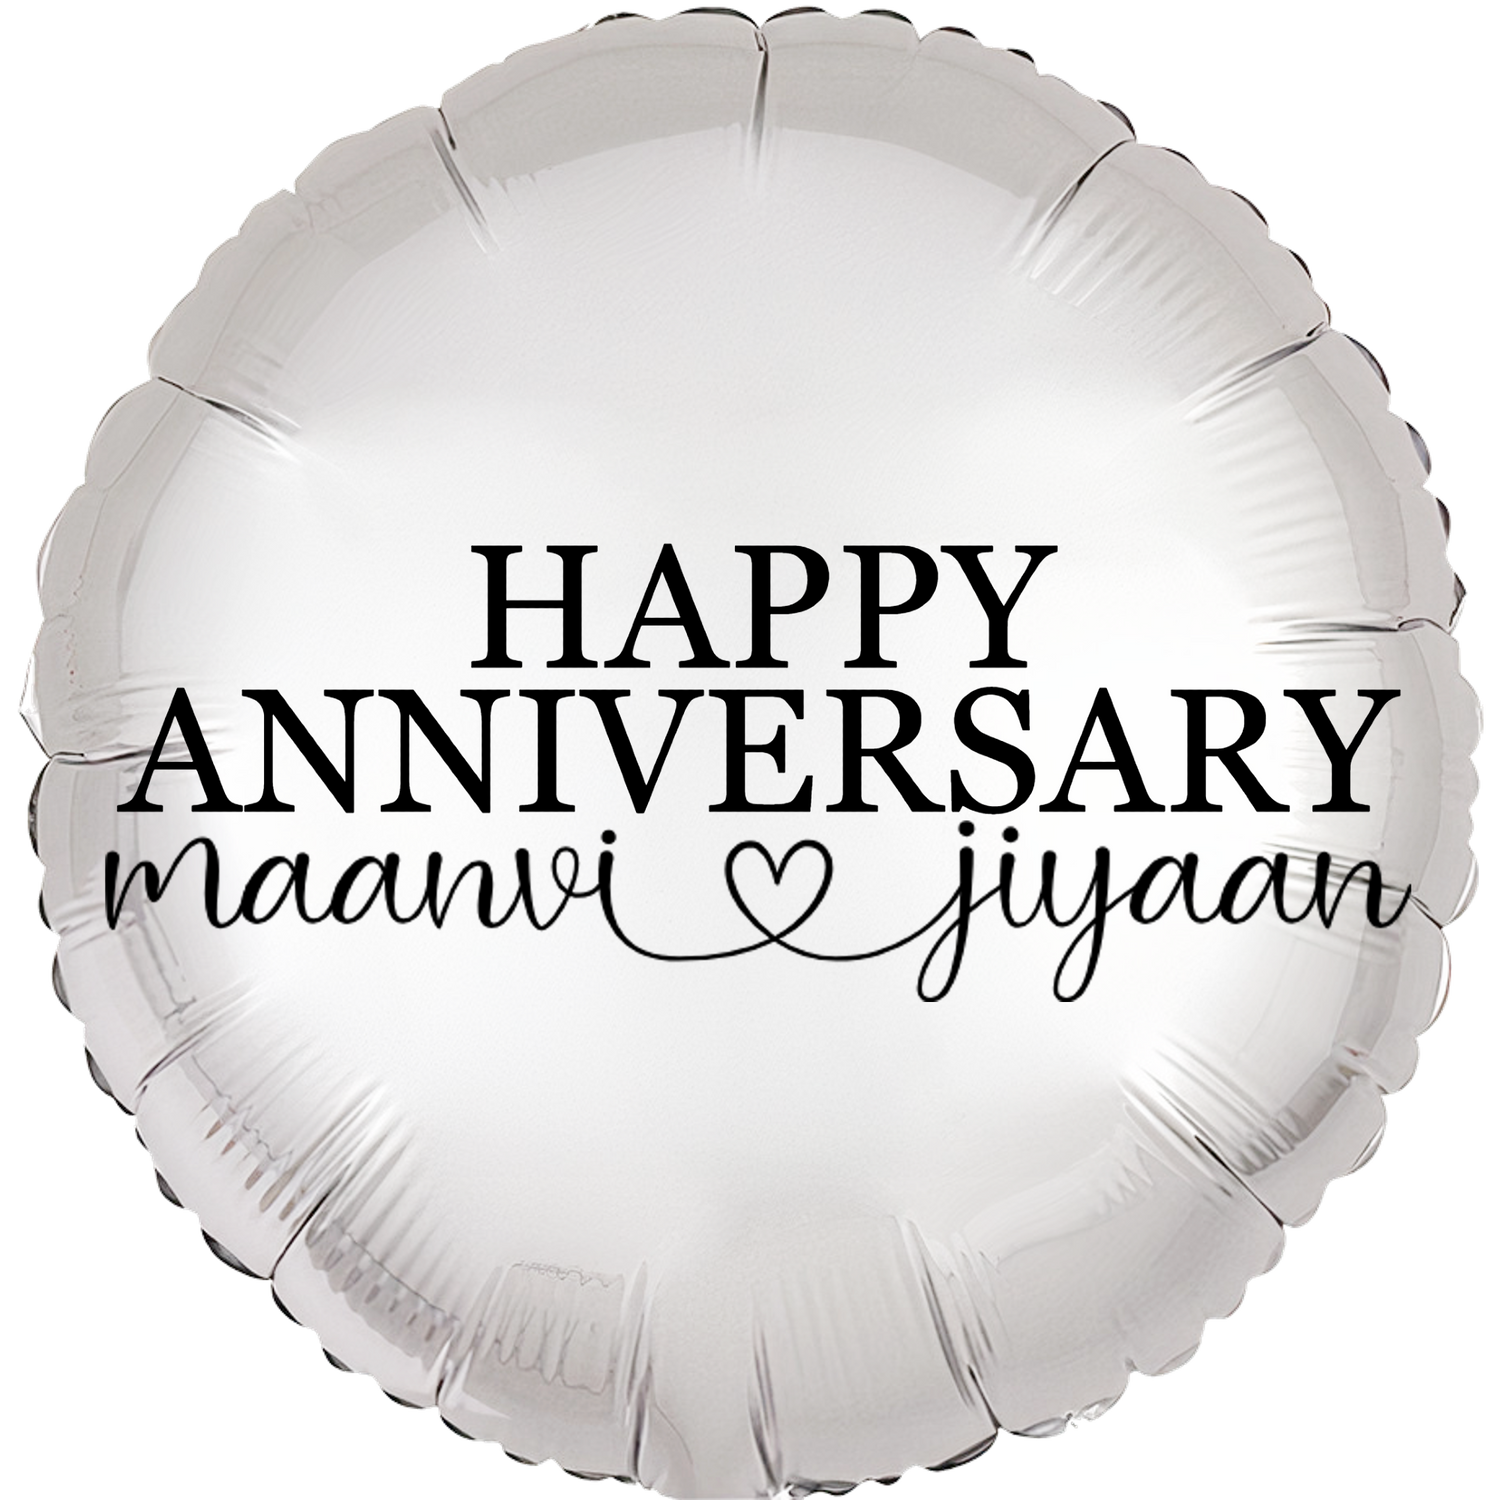 Custom Name/Text/Message Silver Round Balloons For First Wedding Anniversary, 2nd/3rd/5th/10th/15th/20th/25th/30th/35th/40th/45th/50th/55th/60th/65th/75th Marriage Anniversary And Wedding Milestones. Supports Helium/Air, Luxury Bespoke Balloons Make Perfect Decoration Supplies & Surprise For Your Husband/Wife/Partner/Other-Half.